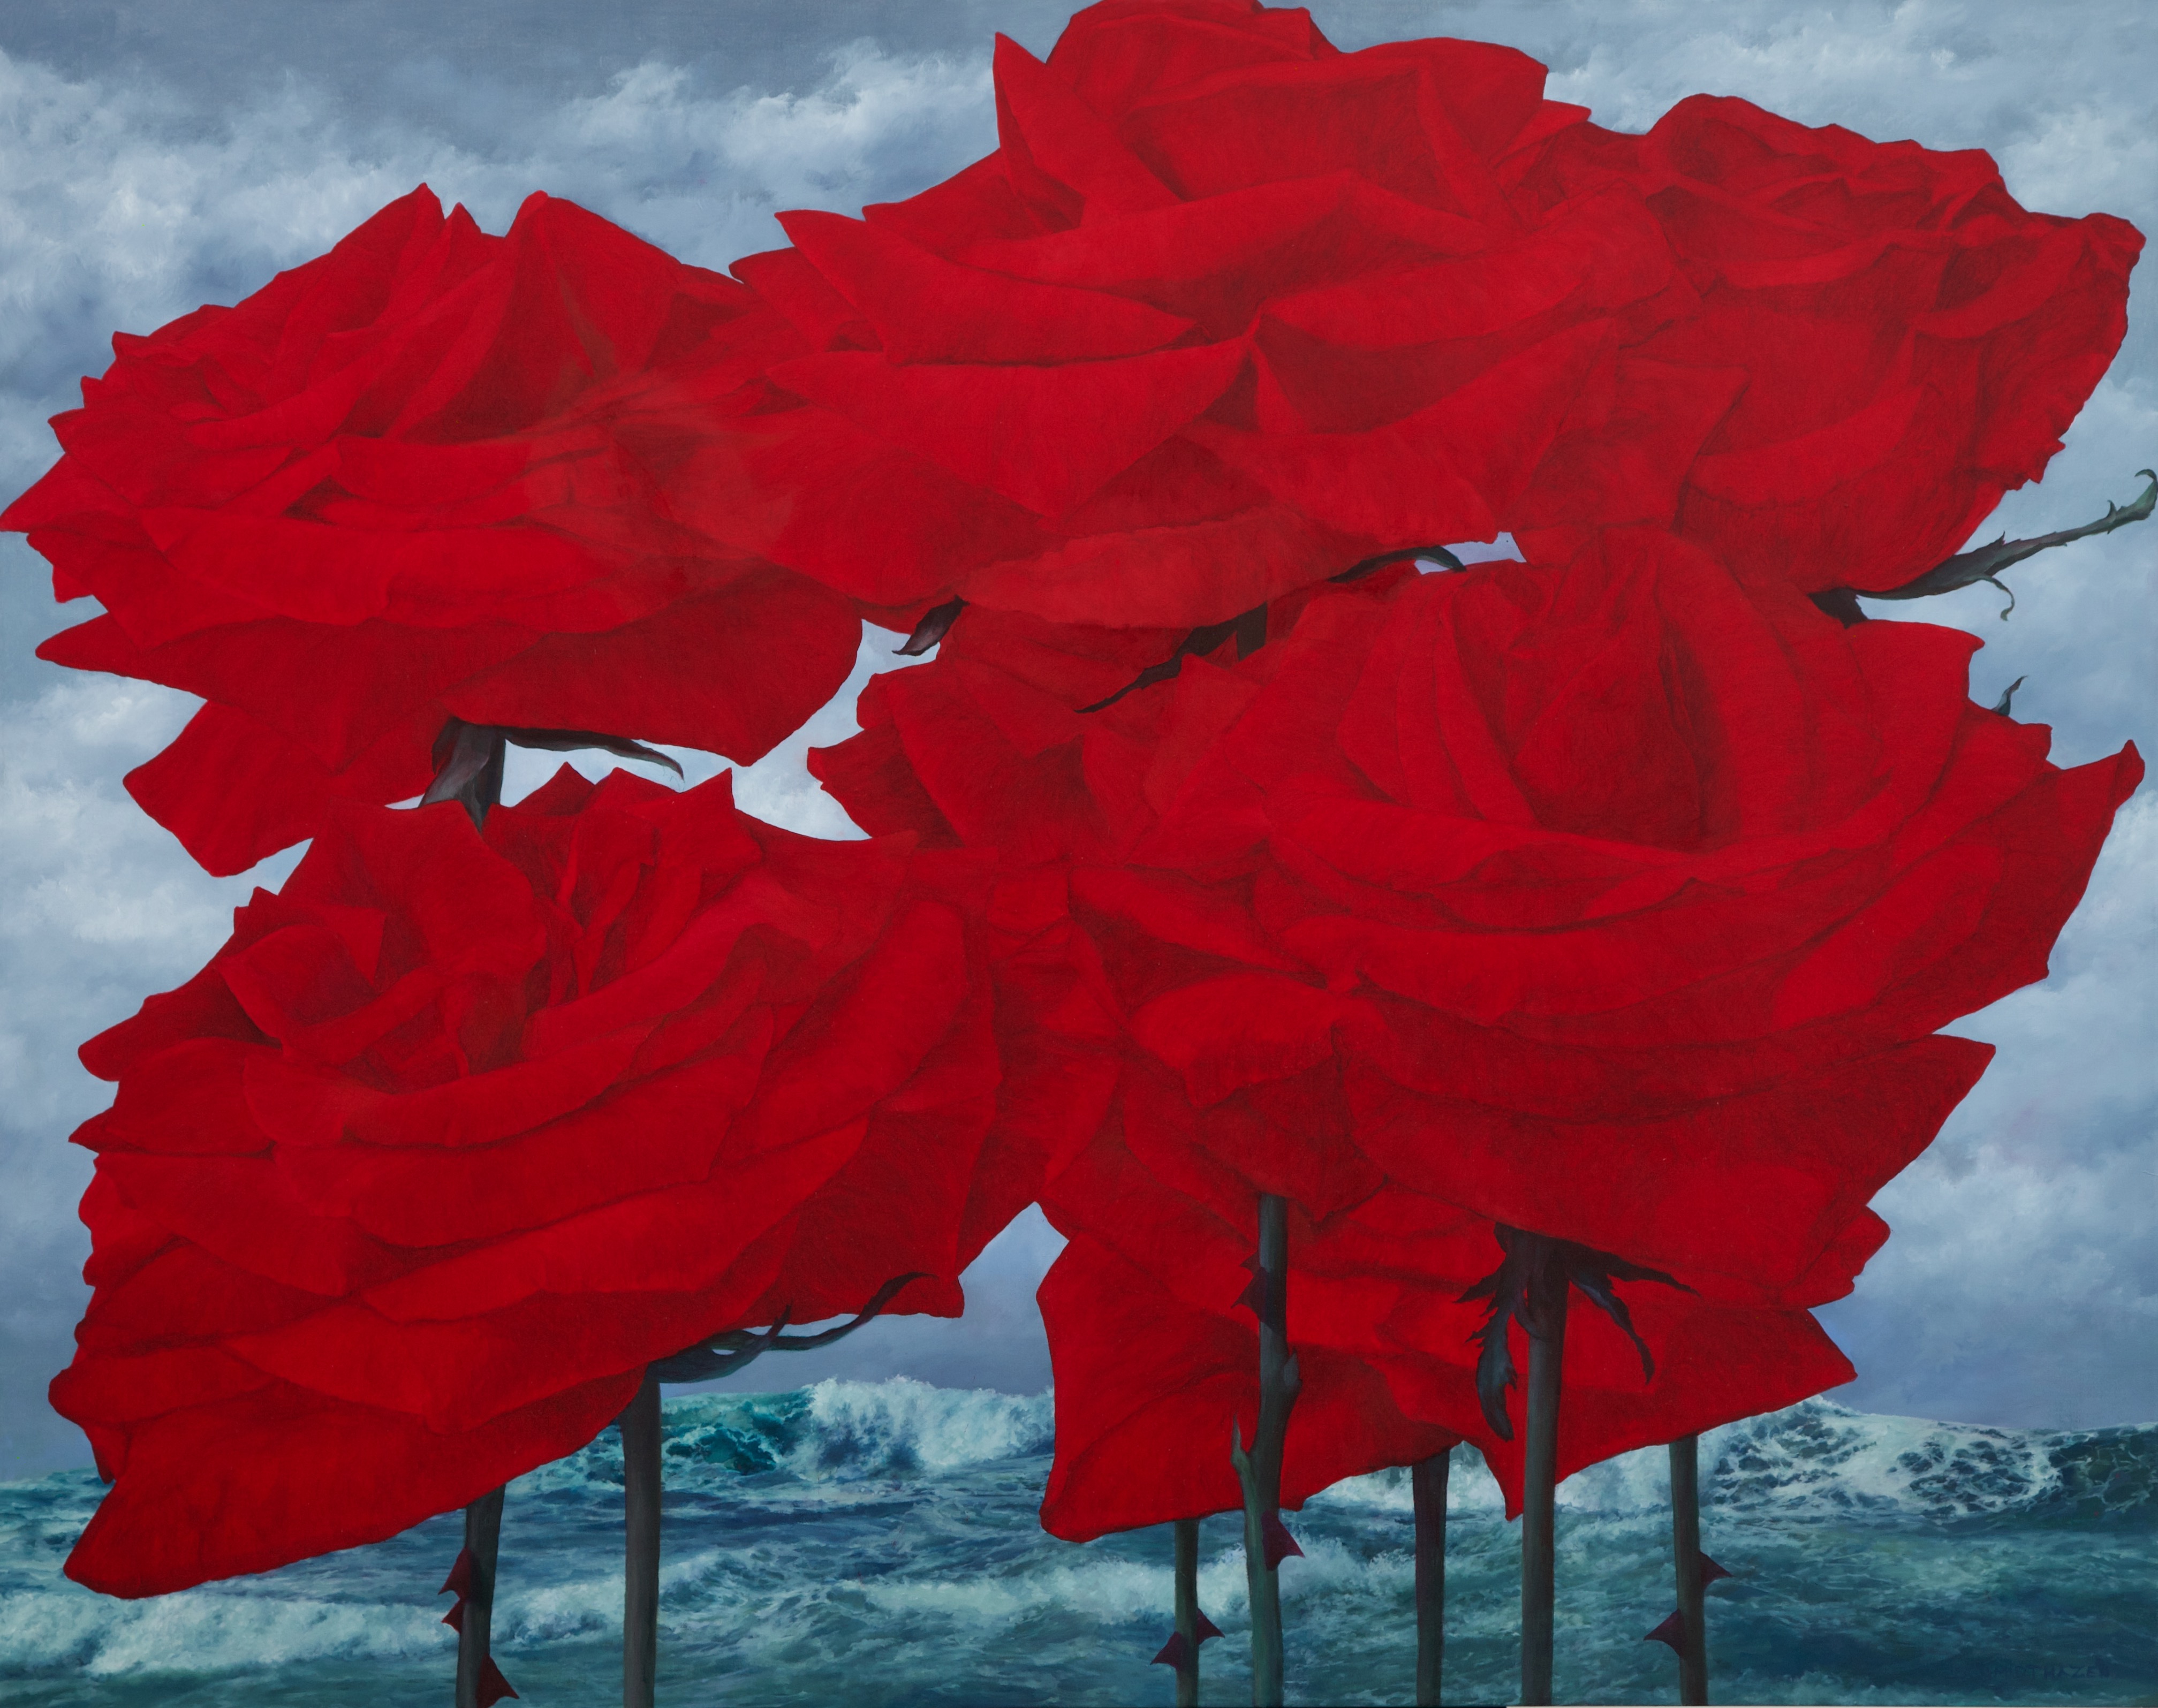 7 RED ROSES, SEA